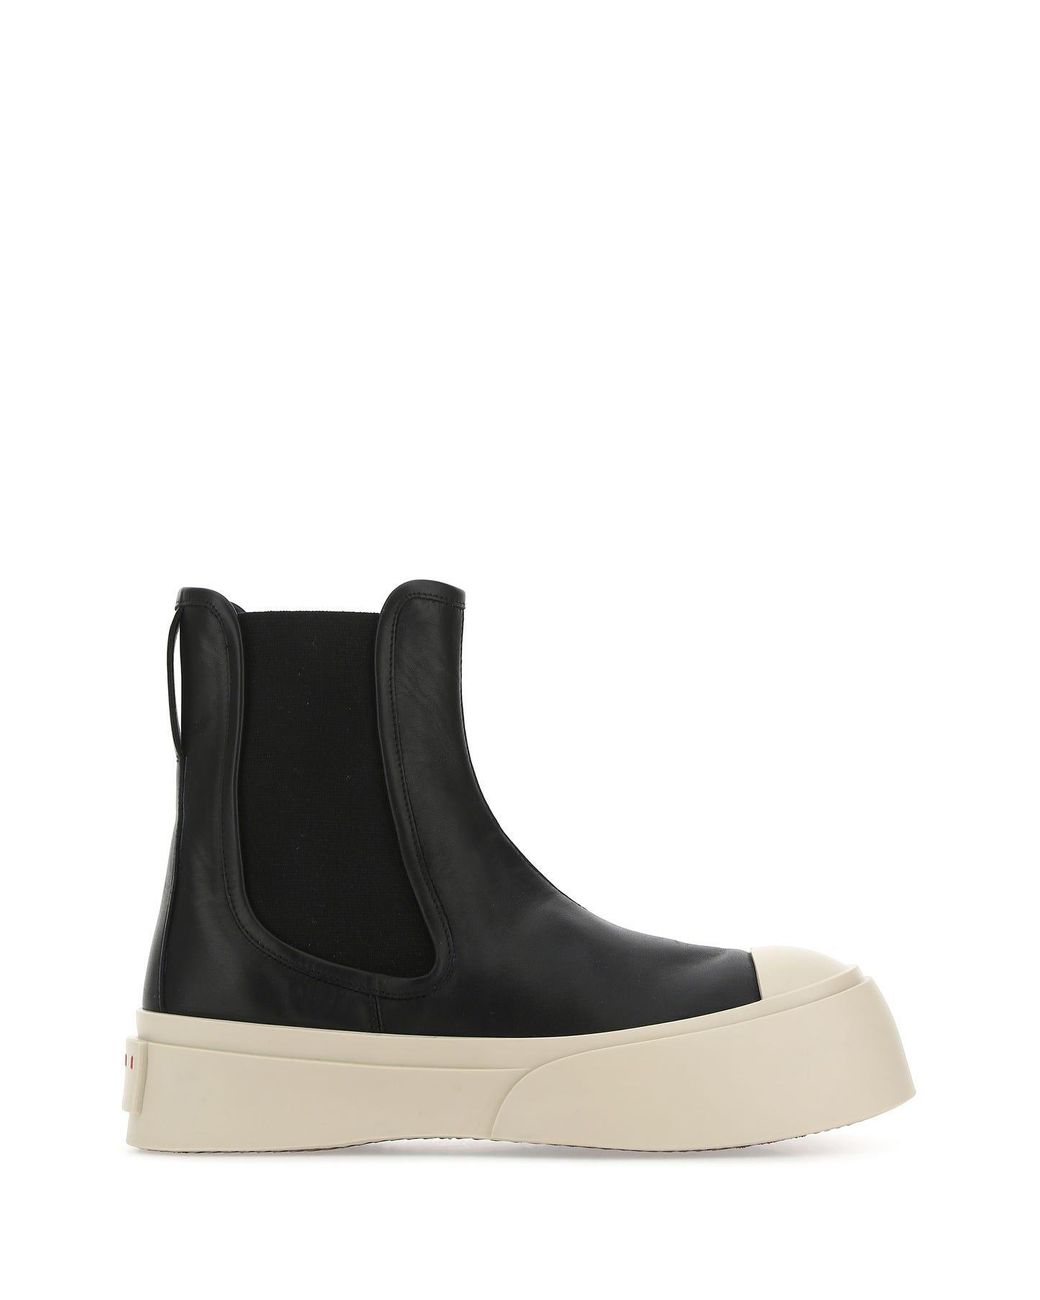 Marni Two-tone Leather Pablo Ankle Boots in Black | Lyst